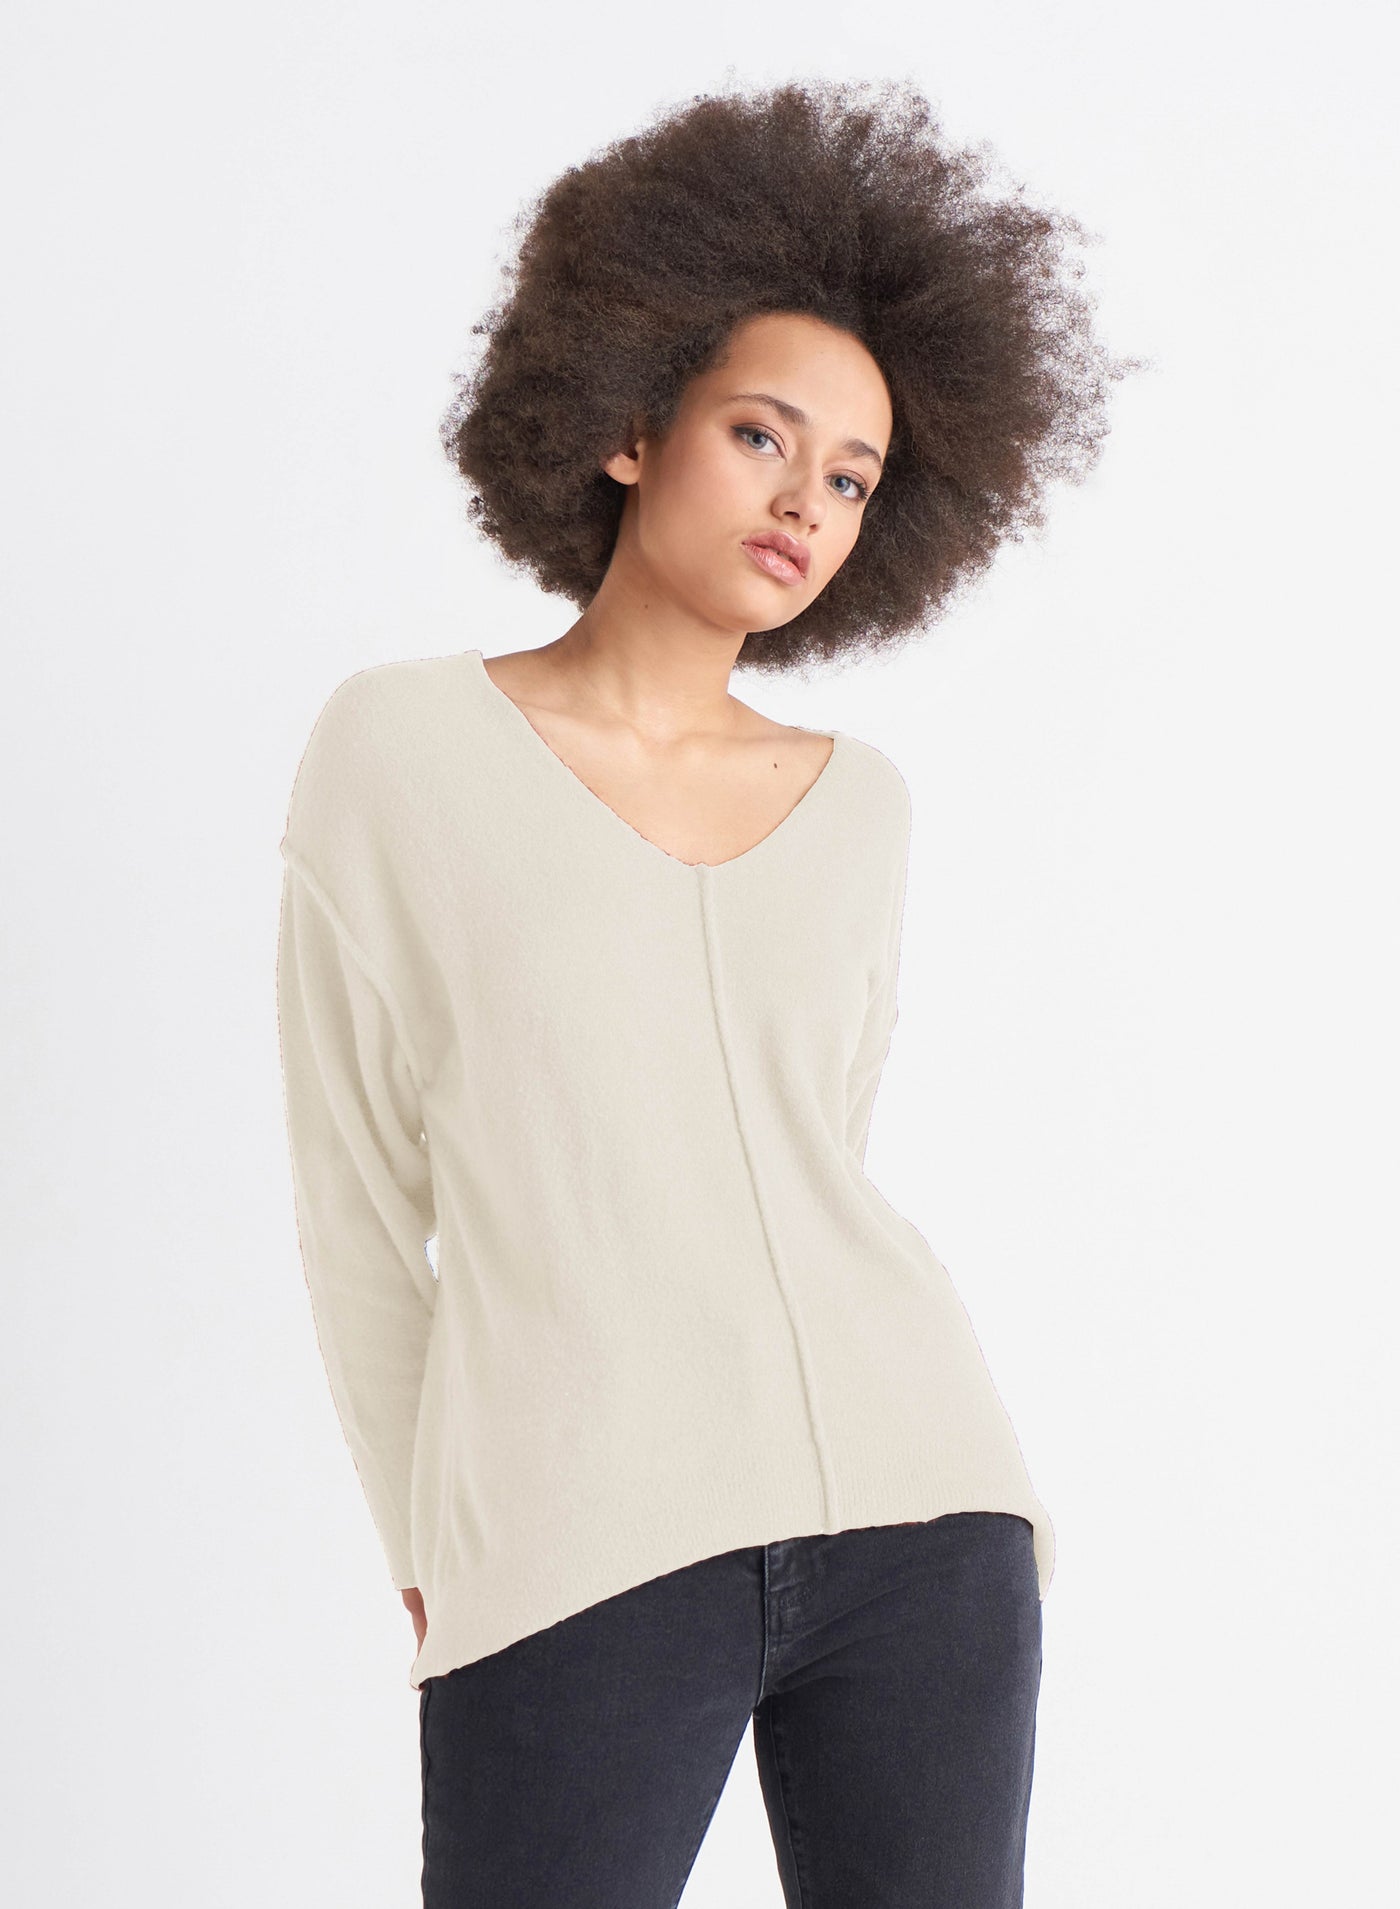 Ultra Soft V Neck Sweater - 2 colors available